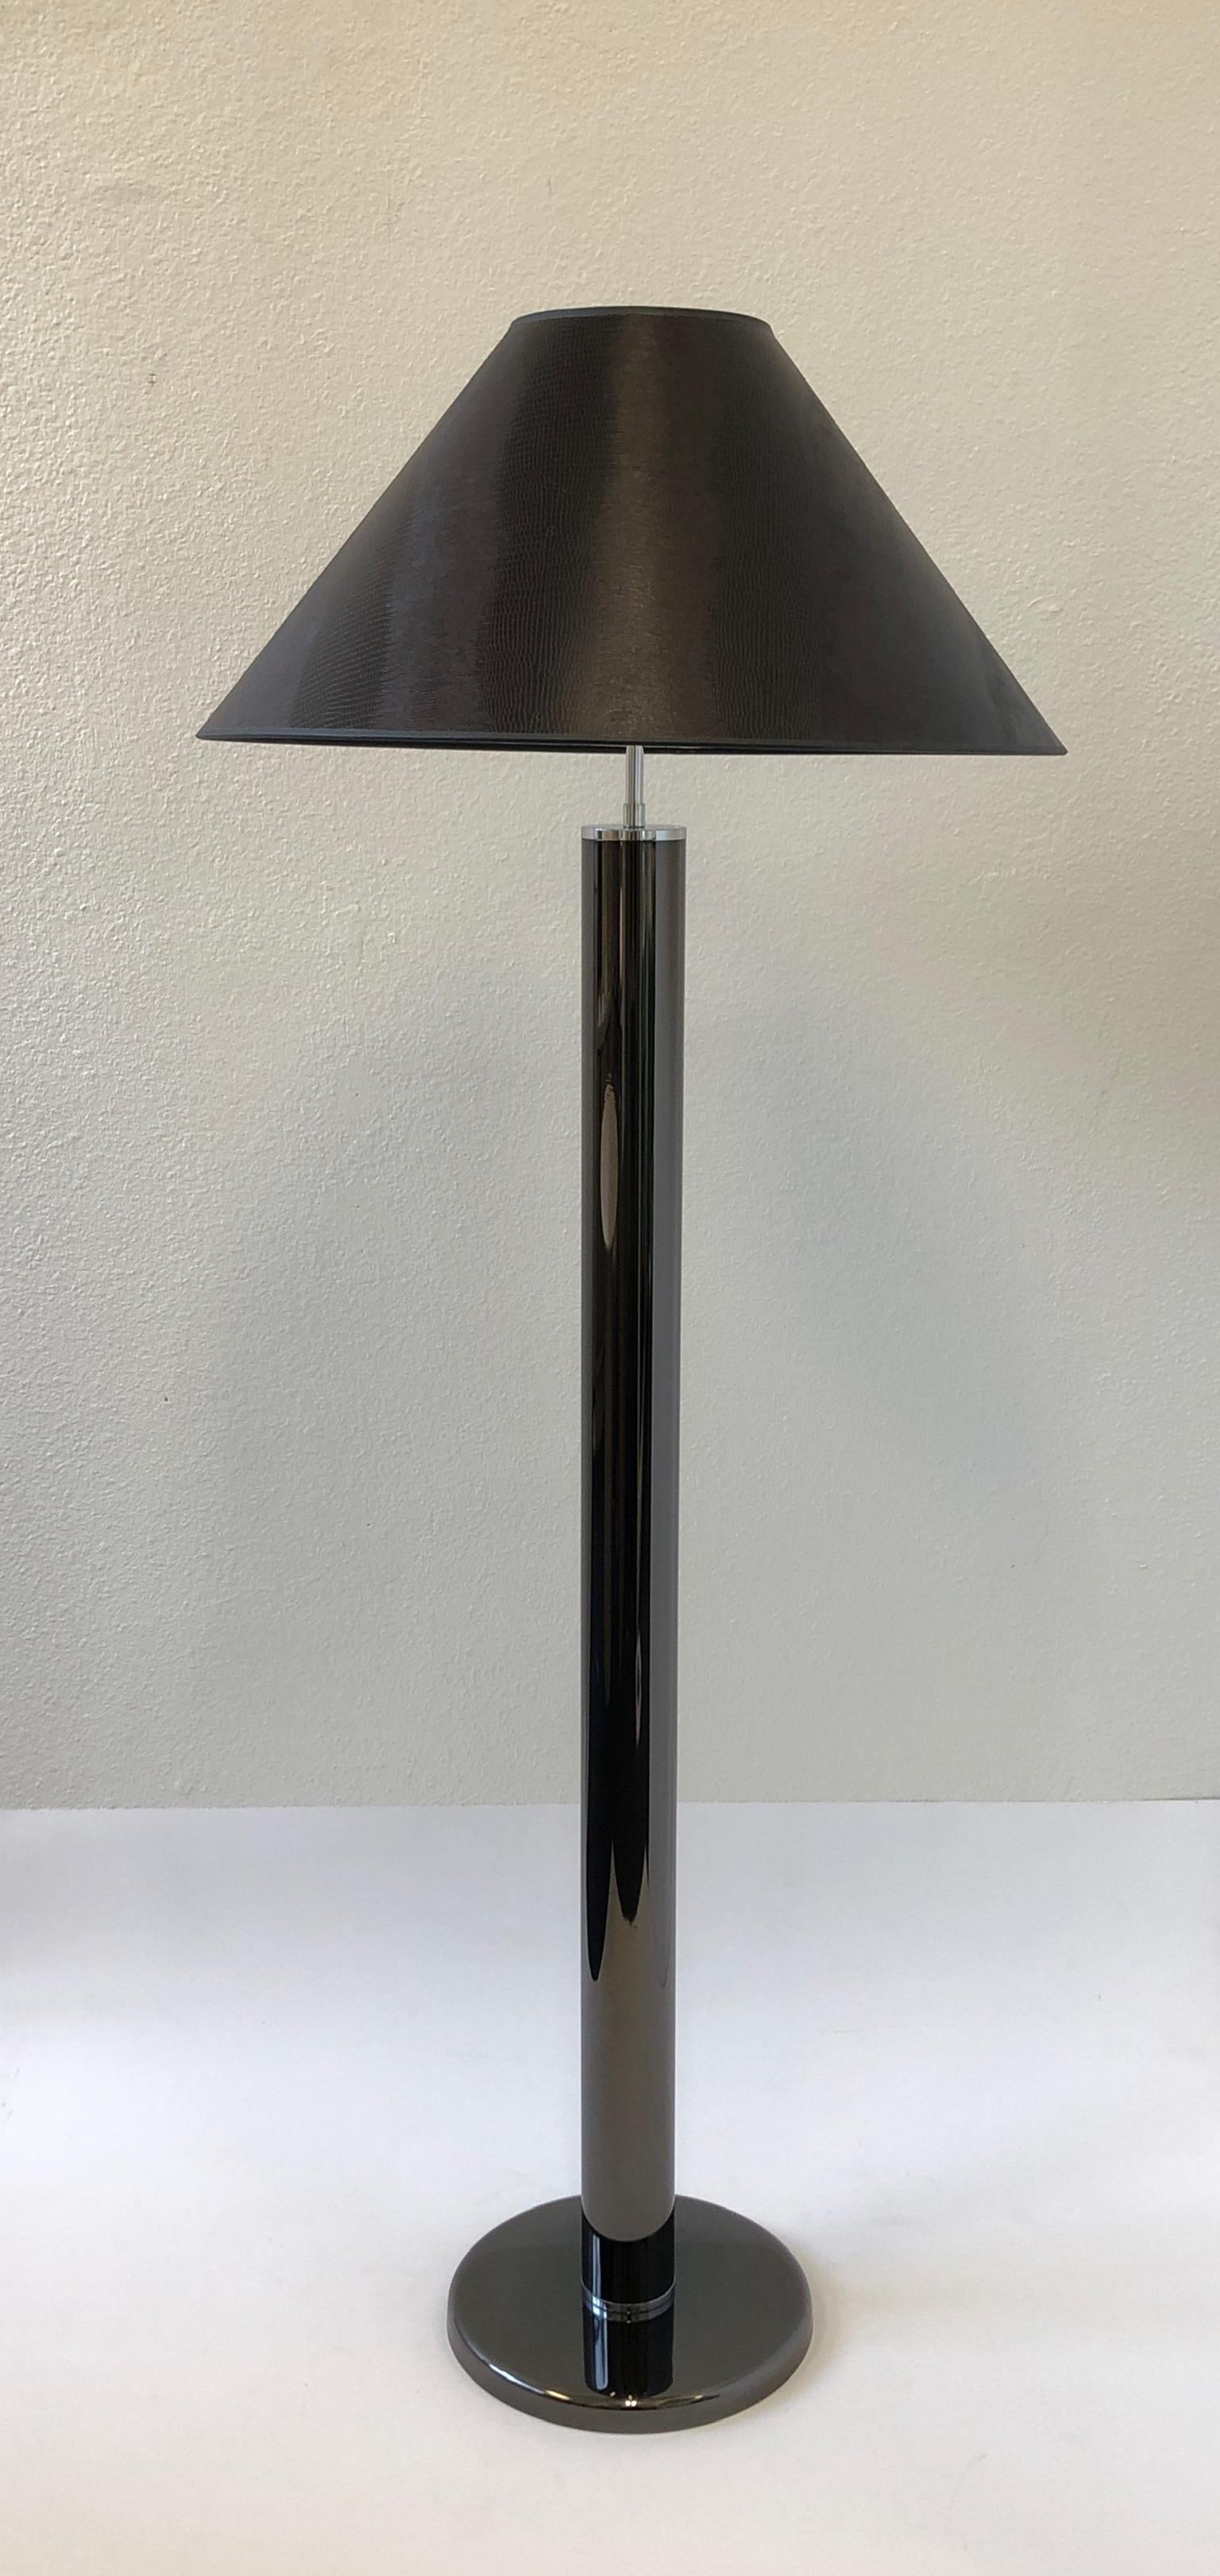 A glamorous 1970s gunmetal and chrome floor lamp by American renowned designer Karl Springer. The lamp has been newly rewired and has a new chocolate brown faux lizard shade.
Overall dimensions: 51.5” high 24” diameter 12” diameter base.